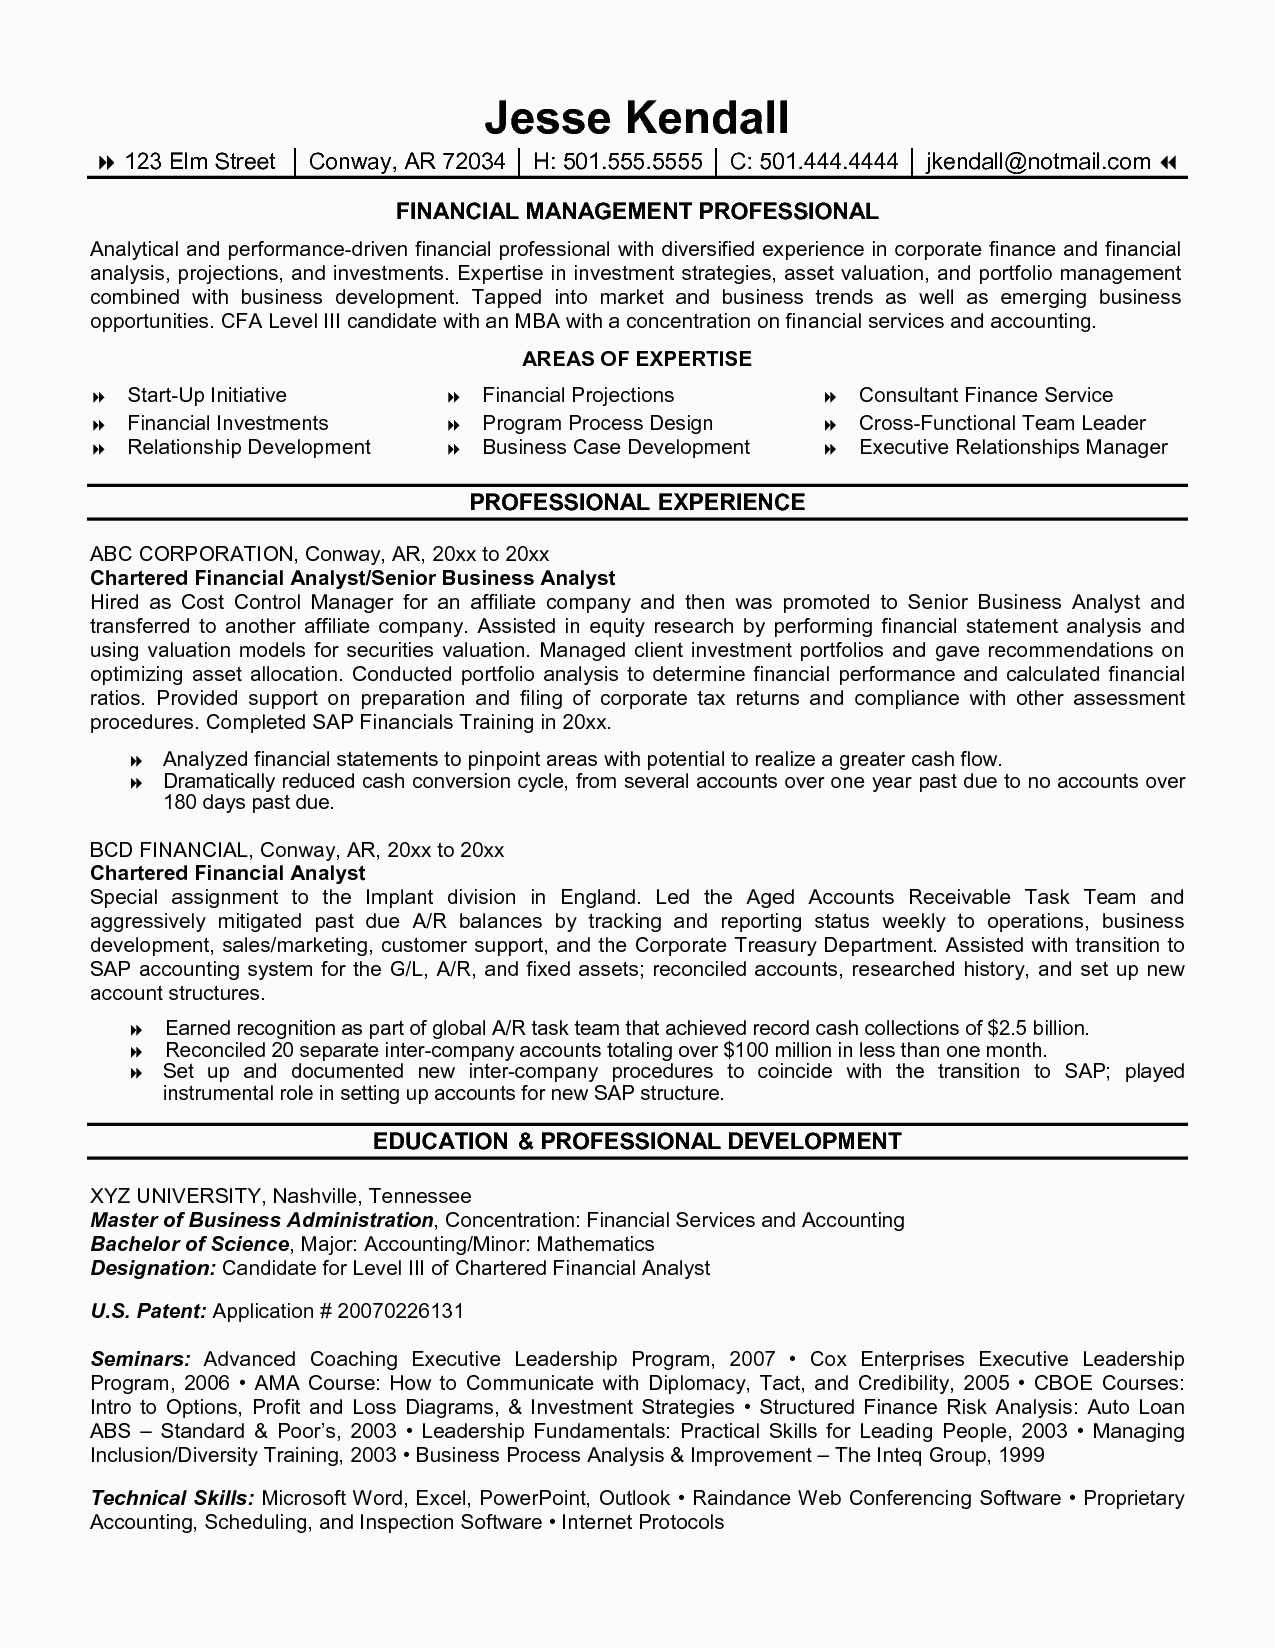 Sample Resume for Financial Analyst Position Finance Analyst Resume Samples